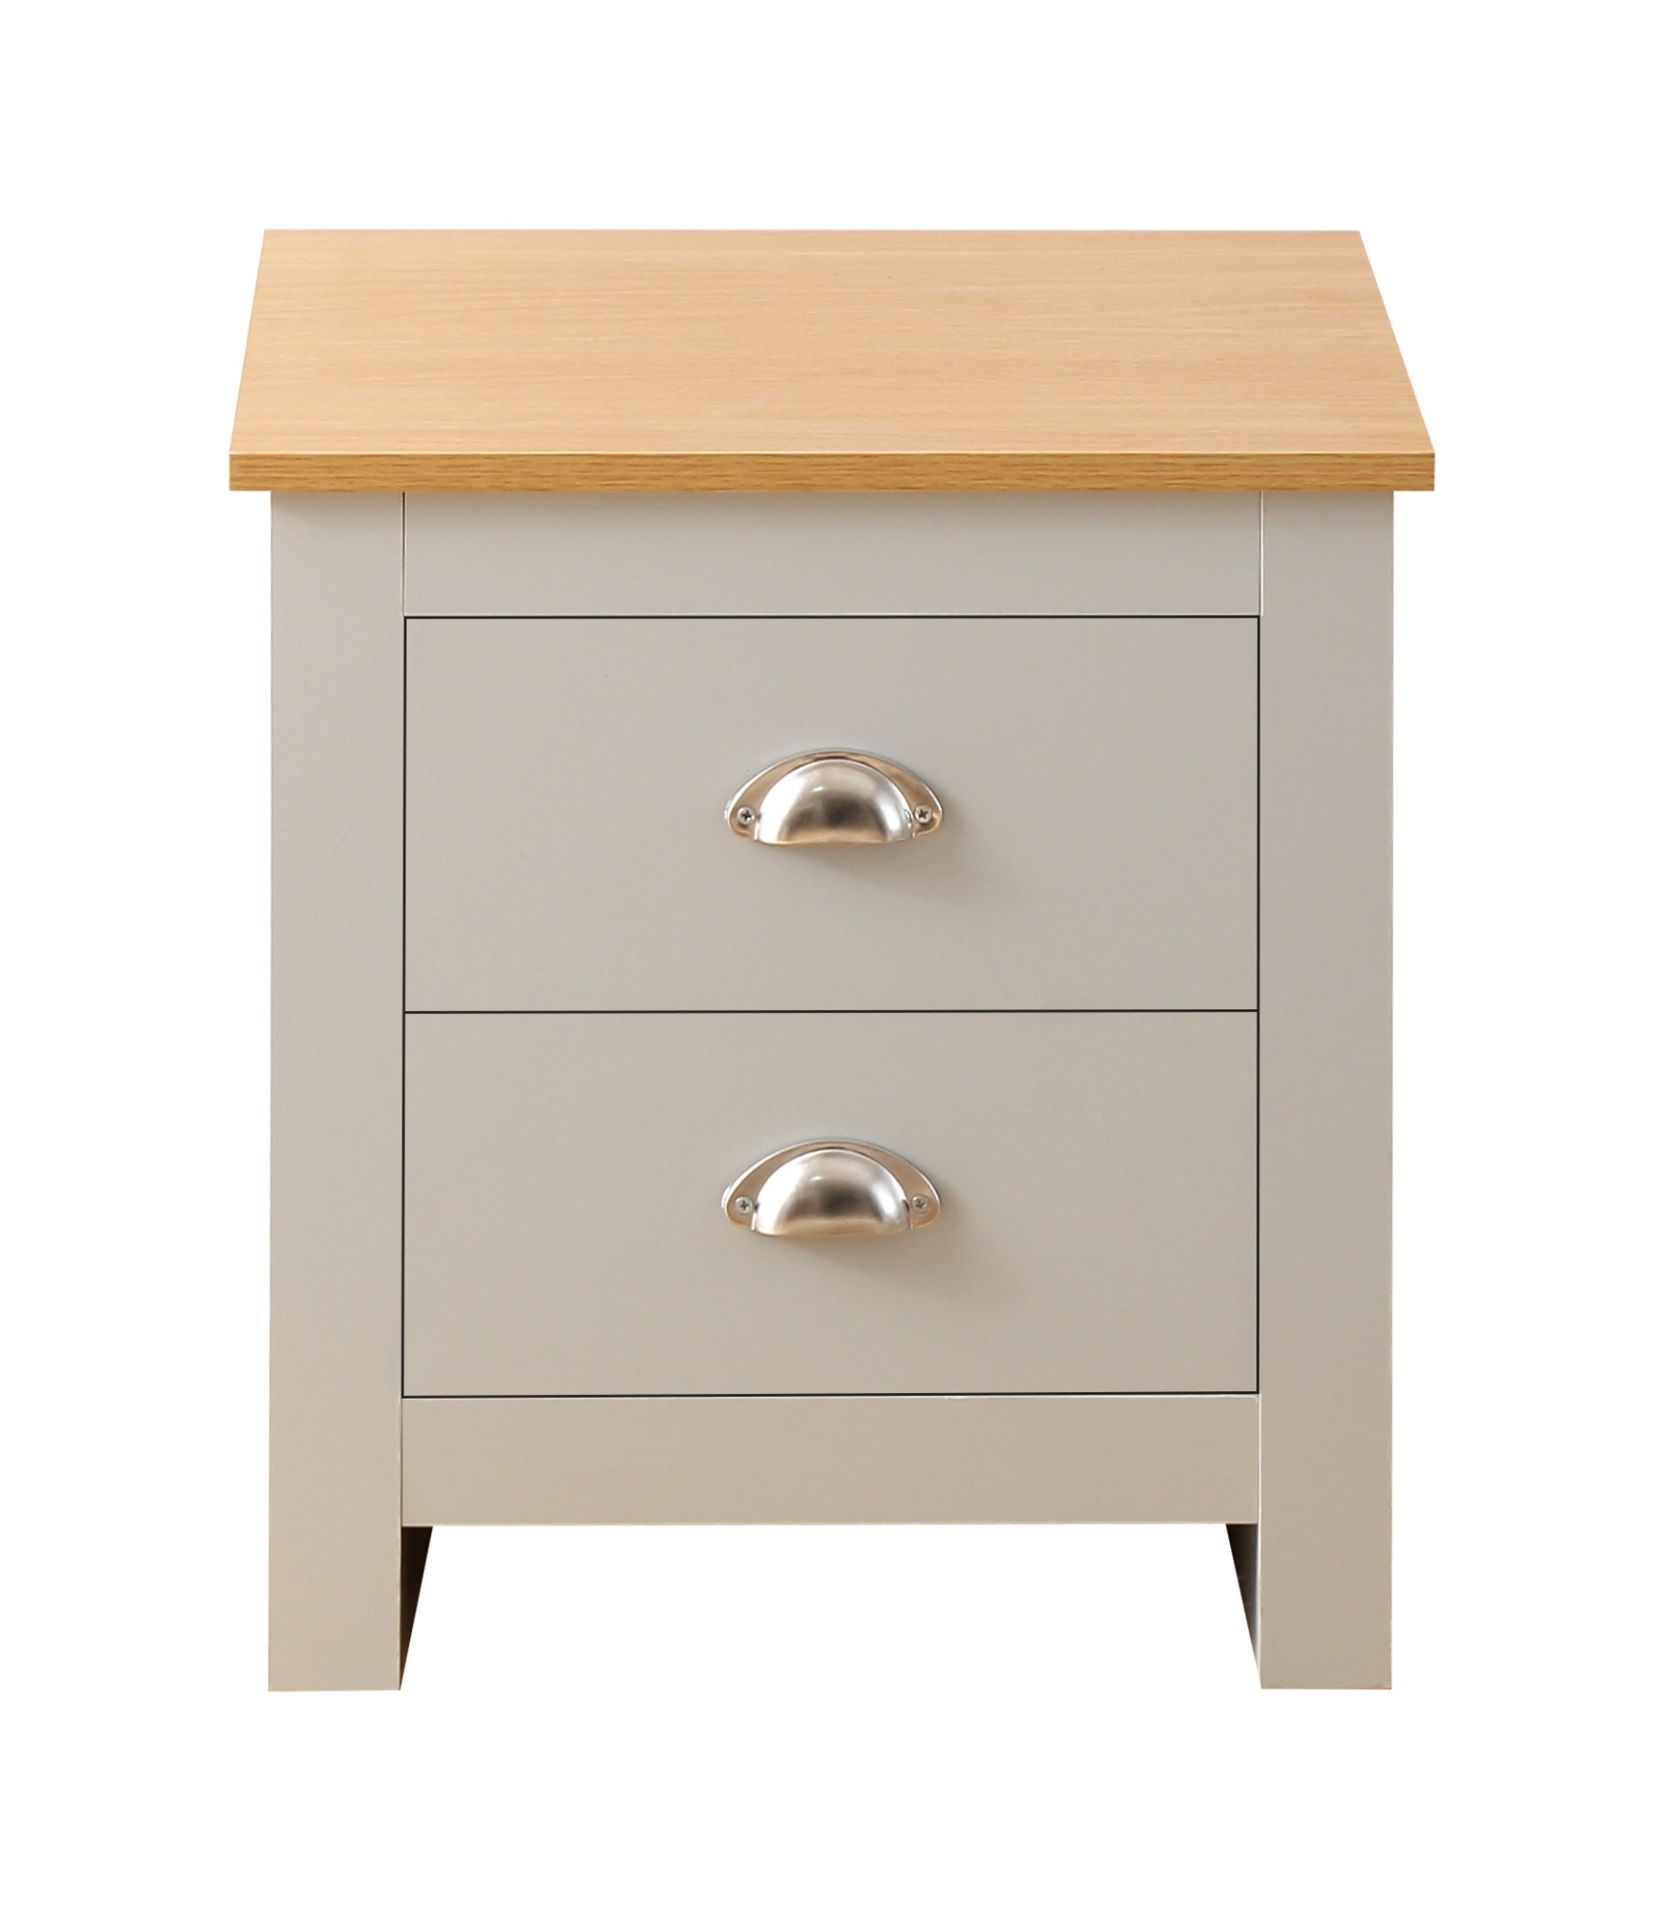 PAIR OF GREY WITH OAK TOP SHAKER-INSPIRED STYLISH DESIGN BEDSIDES - Image 2 of 4